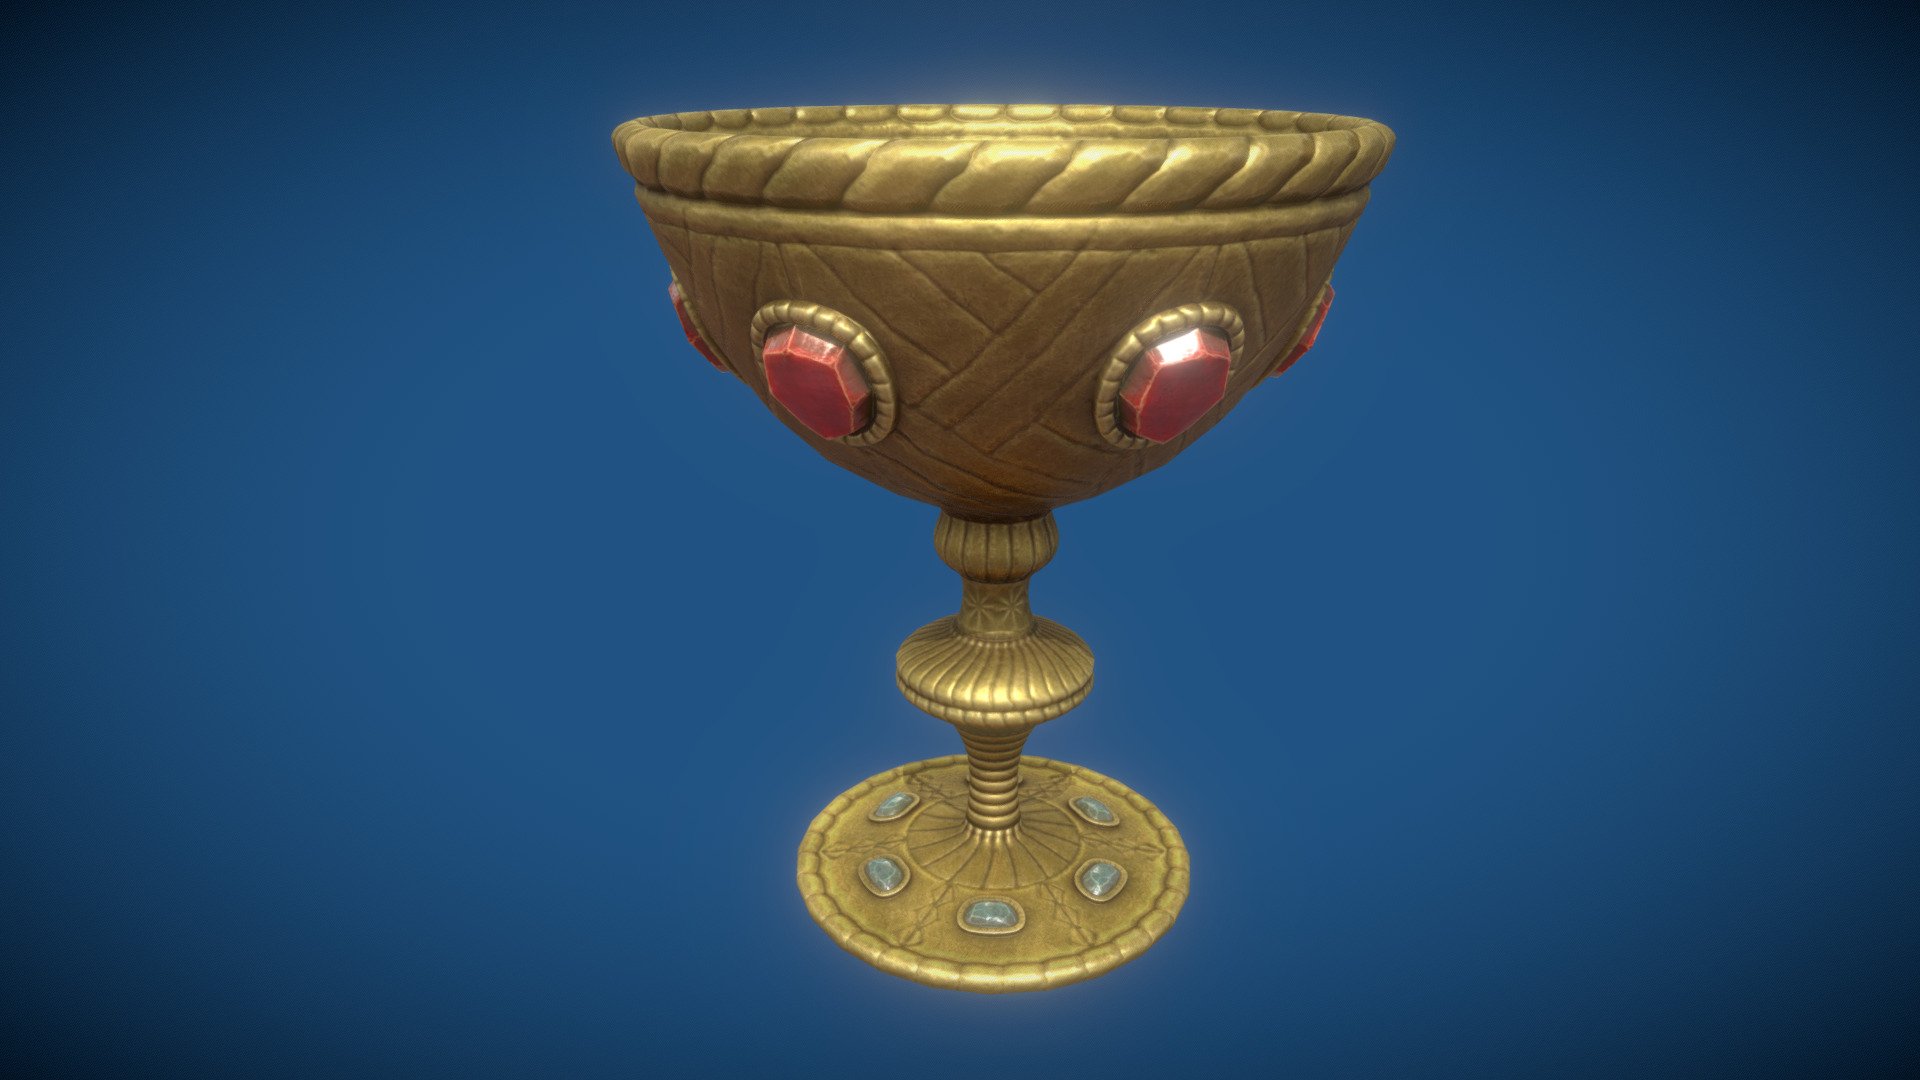 Subscribe to my youtube channel: https://www.youtube.com/channel/UCZKv7L9XvH2jnnsVqFzP96g

video: https://youtu.be/4slheX3pLZE - king's cup - Download Free 3D model by emelyarules 3d model